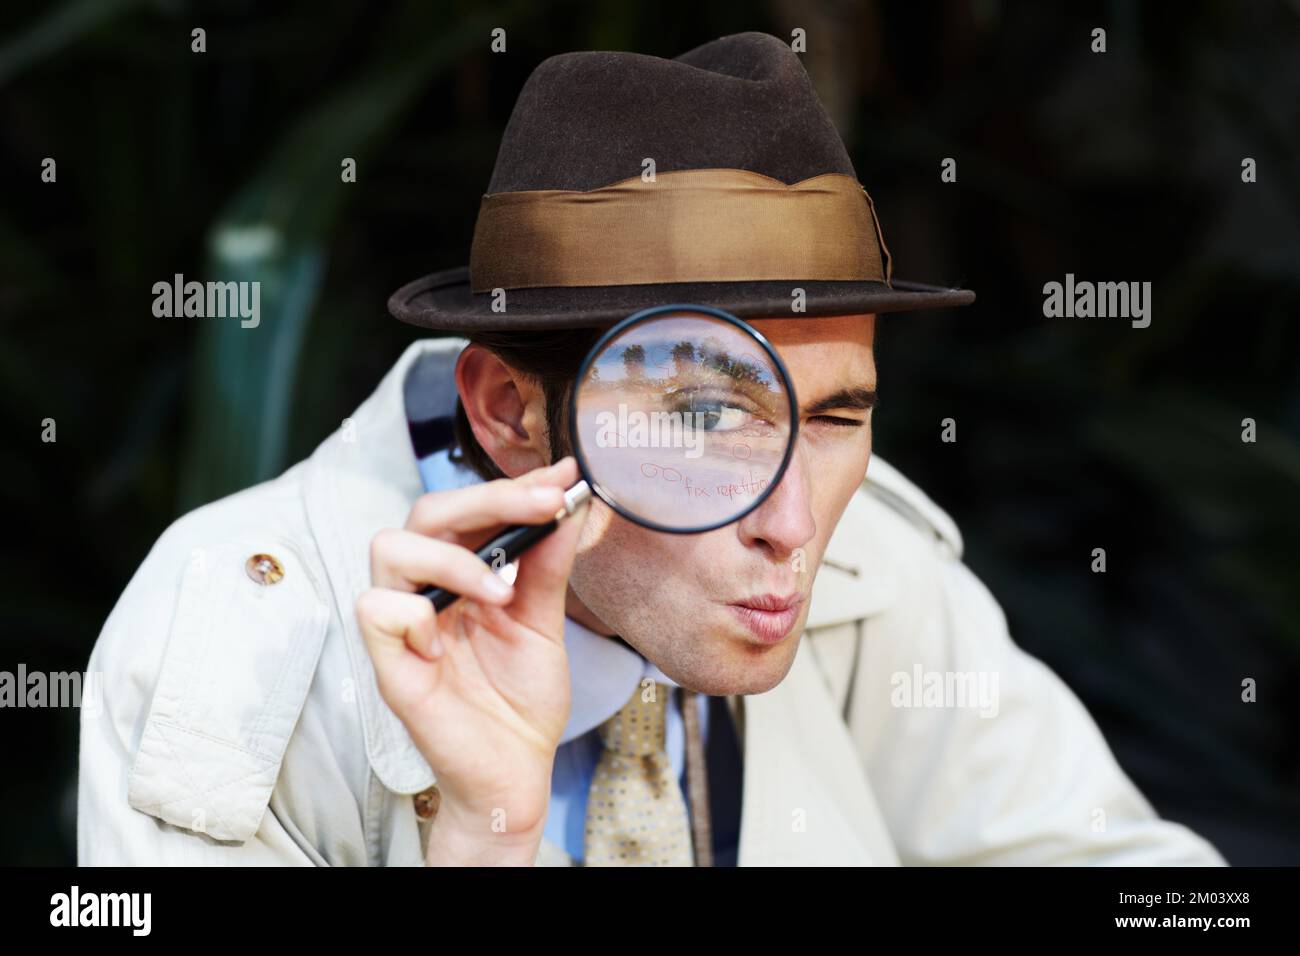 Finding all the clues. Curious private investigator looking through a magnifying glass. Stock Photo